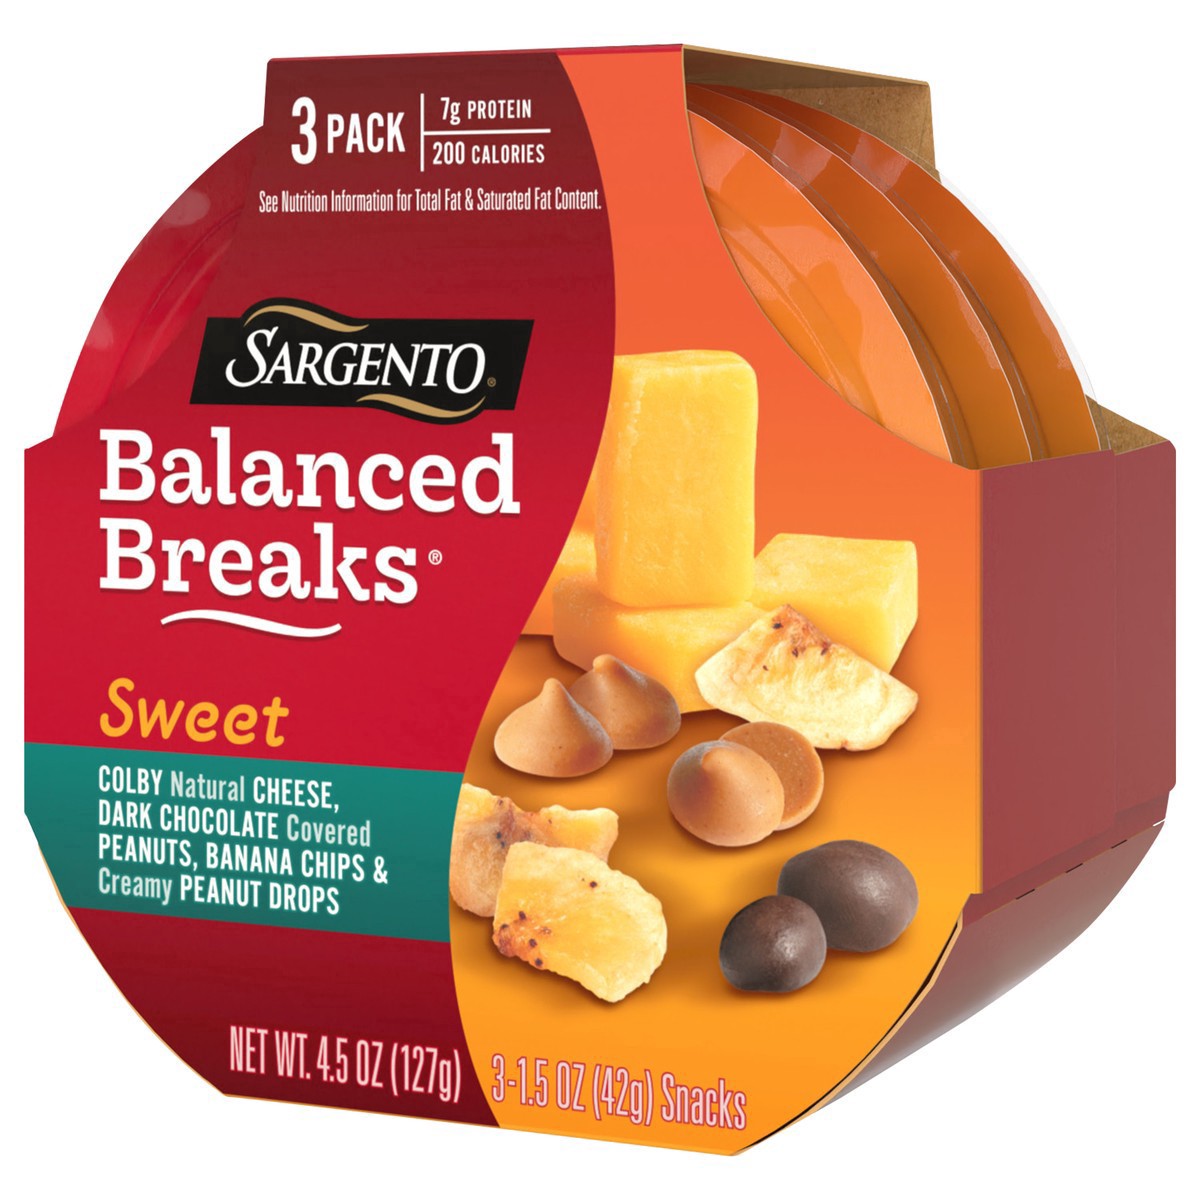 slide 8 of 17, Sargento Sweet Balanced Breaks with Colby Natural Cheese, Dark Chocolate Covered Peanuts, Banana Chips and Creamy Peanut Drops, 1.5 oz., 3-Pack, 4.5 oz